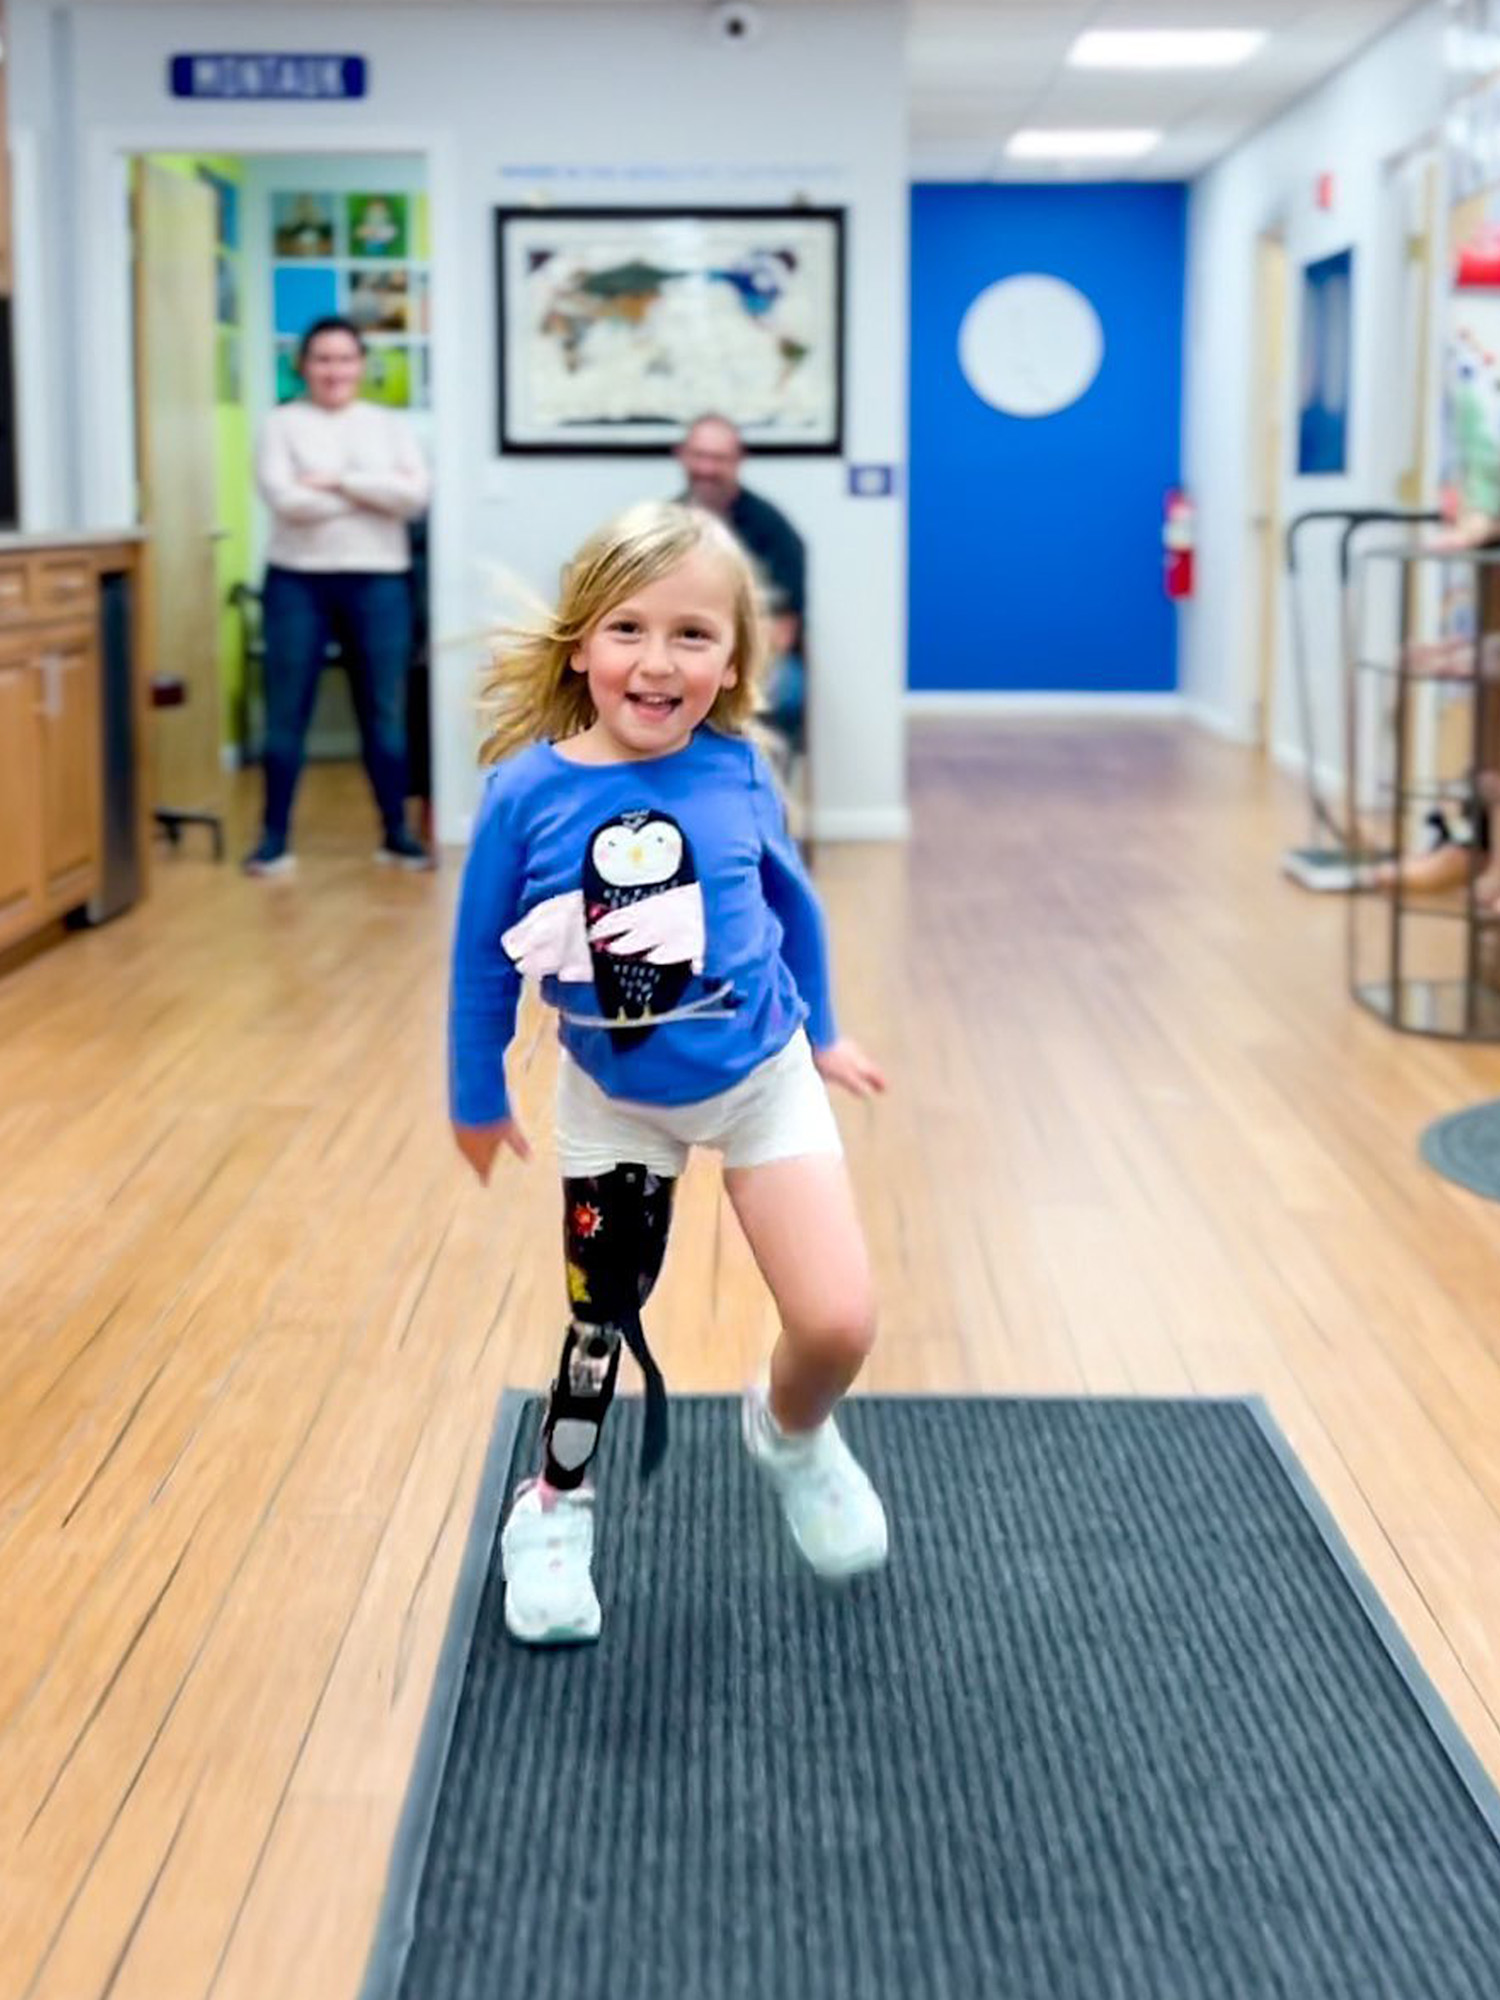 An inspiring image of a young child with an above knee amputation running effortlessly, displaying her remarkable adaptability and determination.